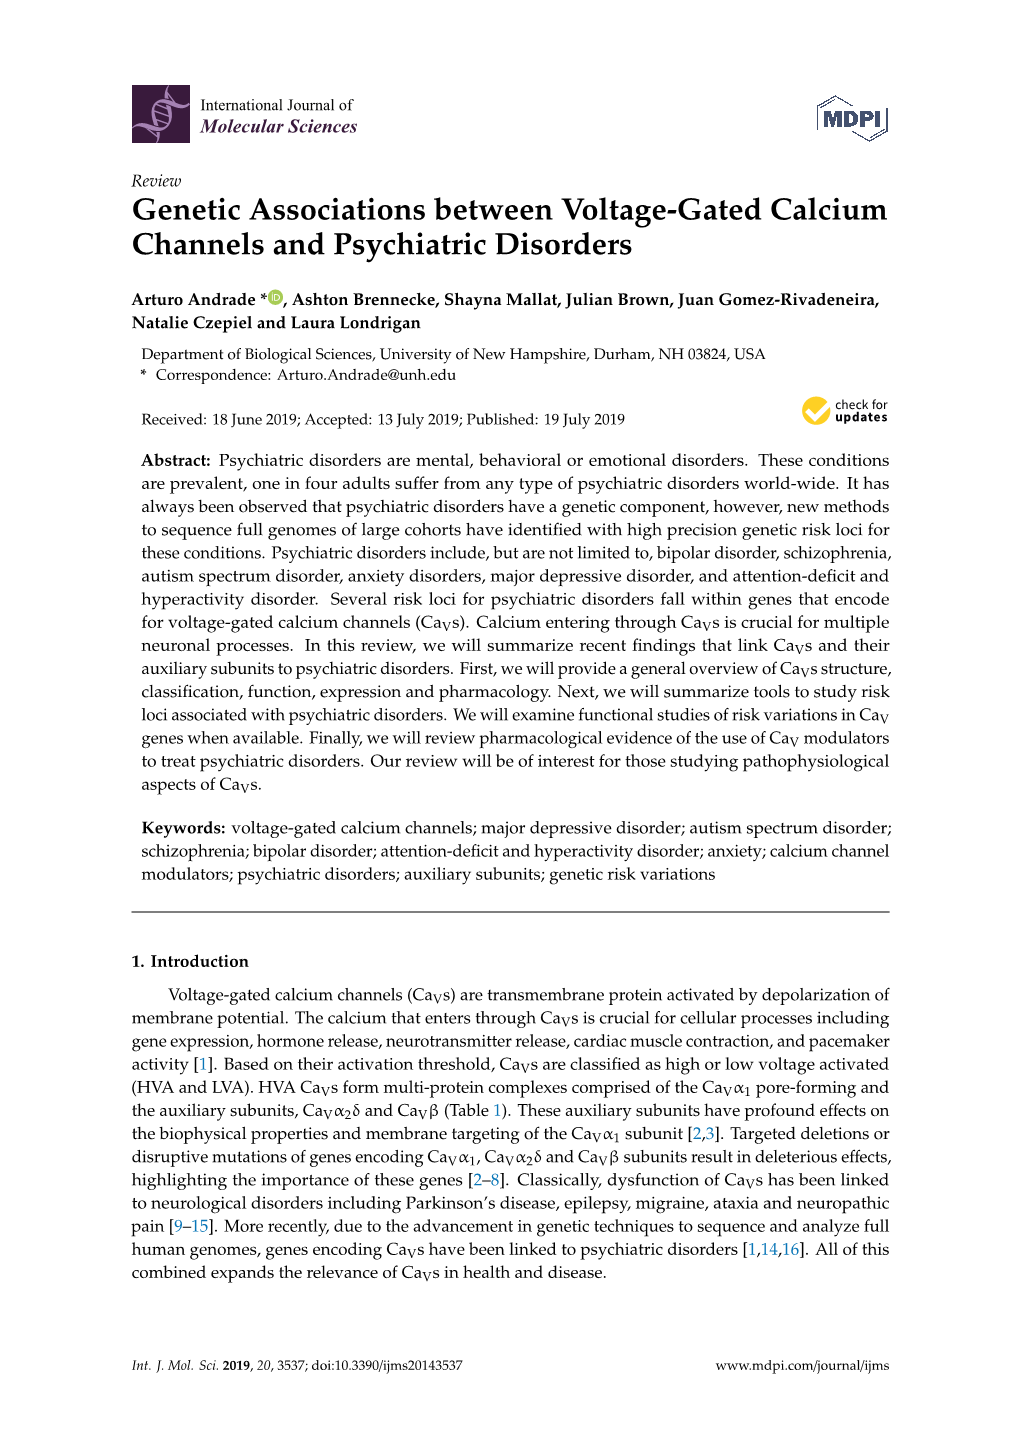 Genetic Associations Between Voltage-Gated Calcium Channels and Psychiatric Disorders